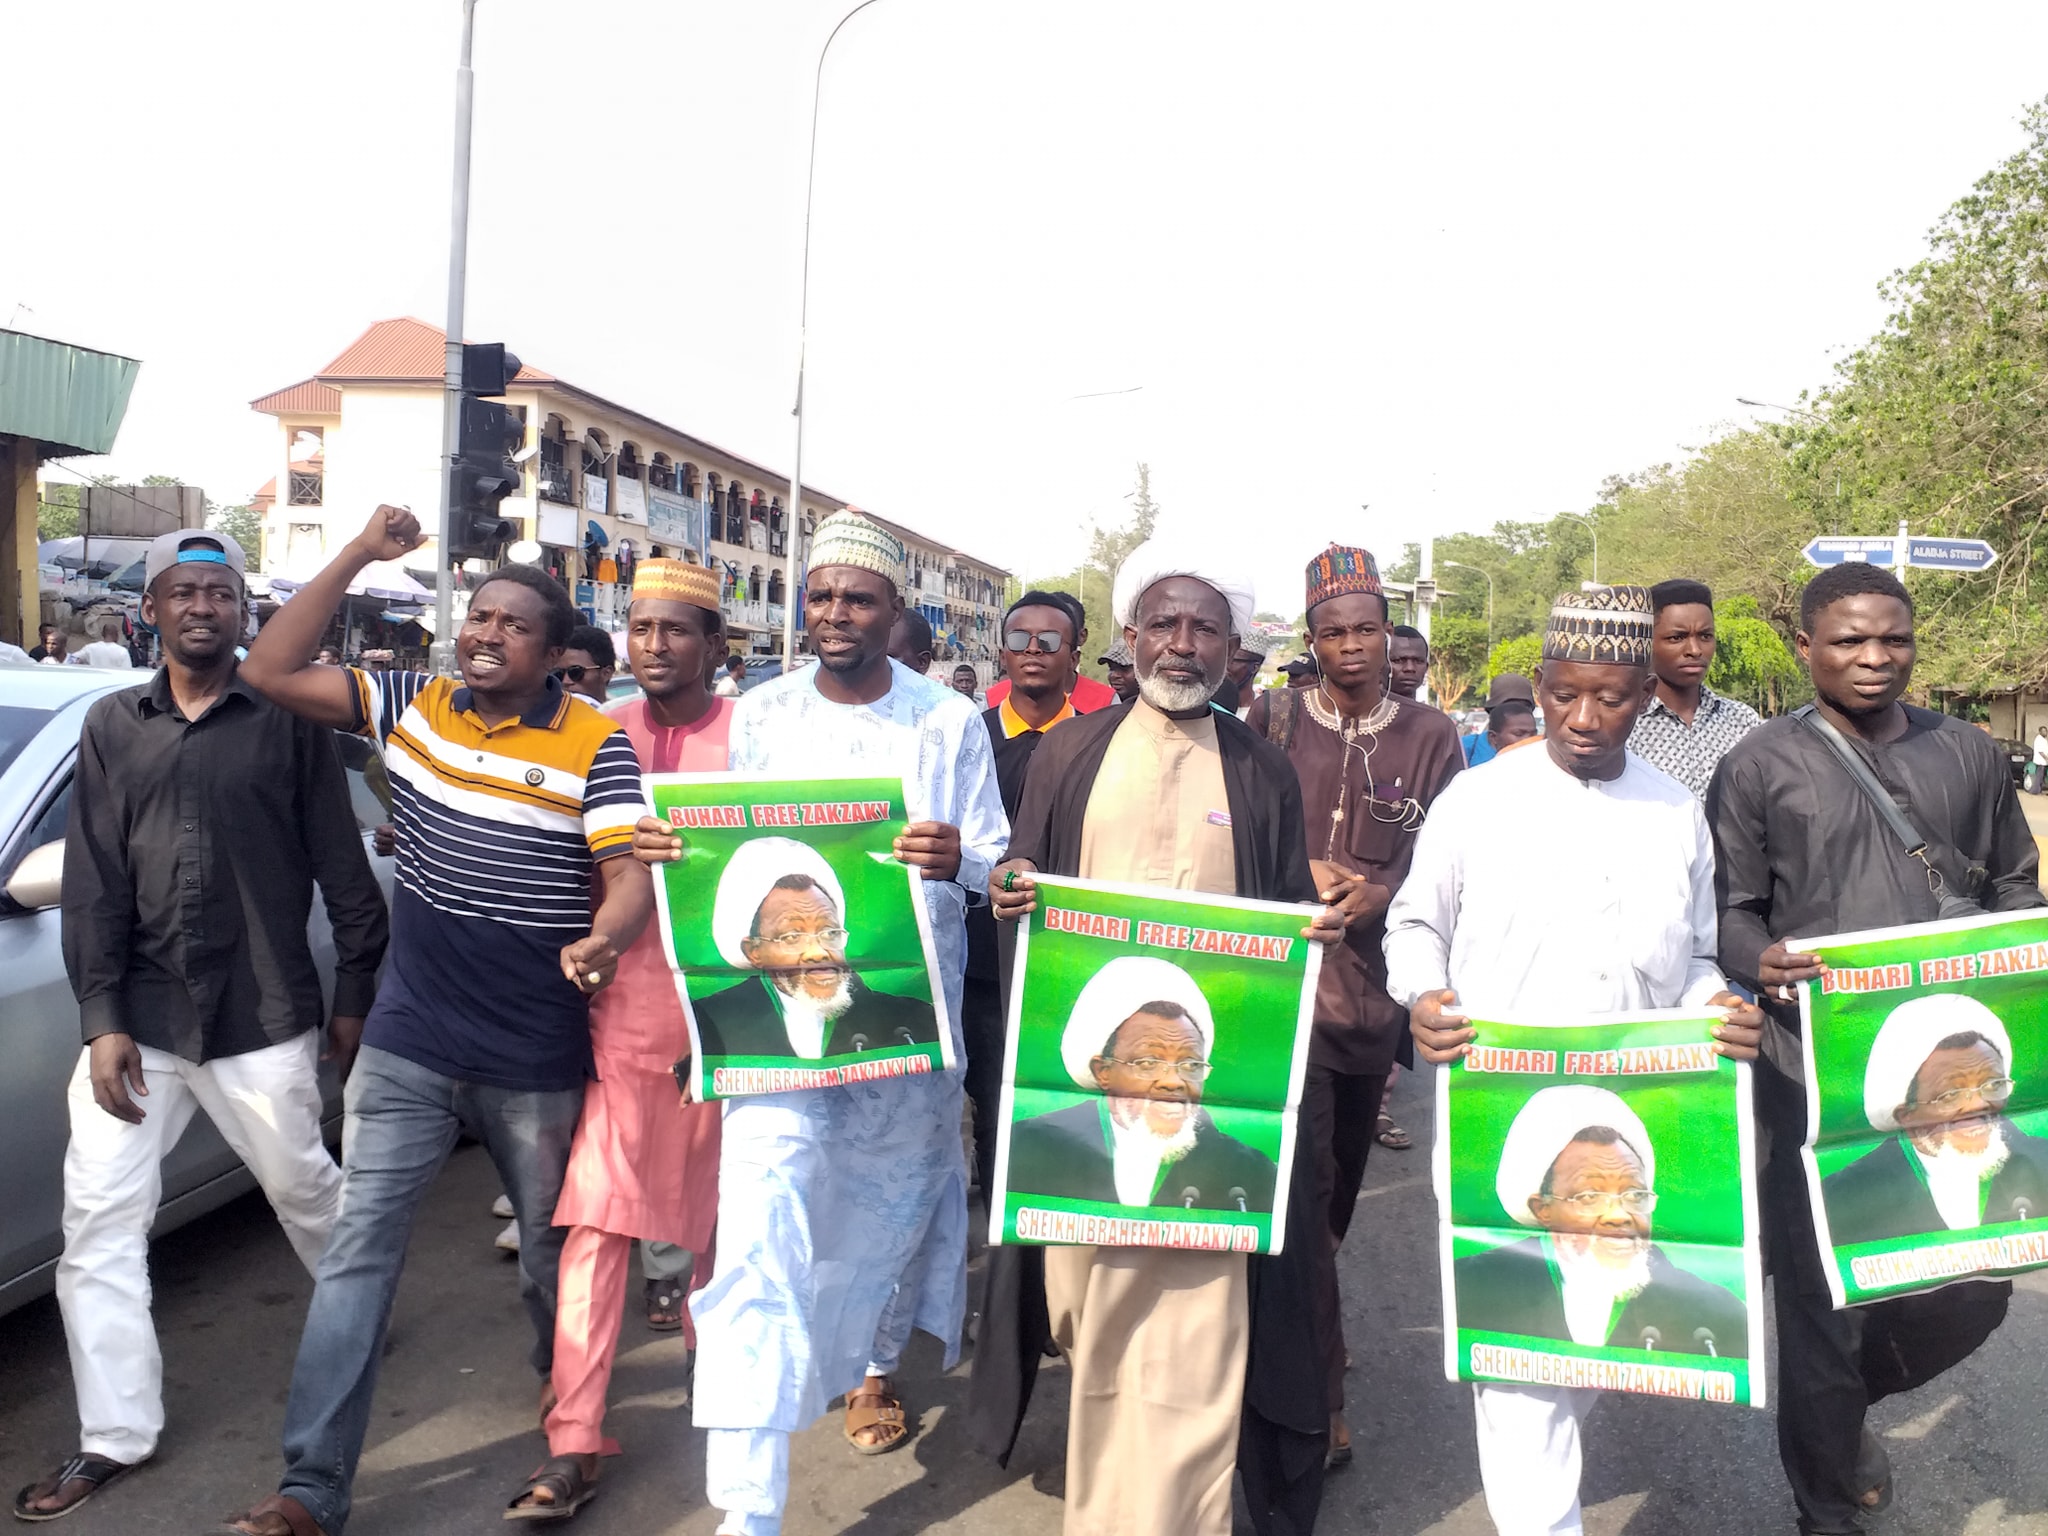  pro zakzaky protesters in abj on 20 april 2021 